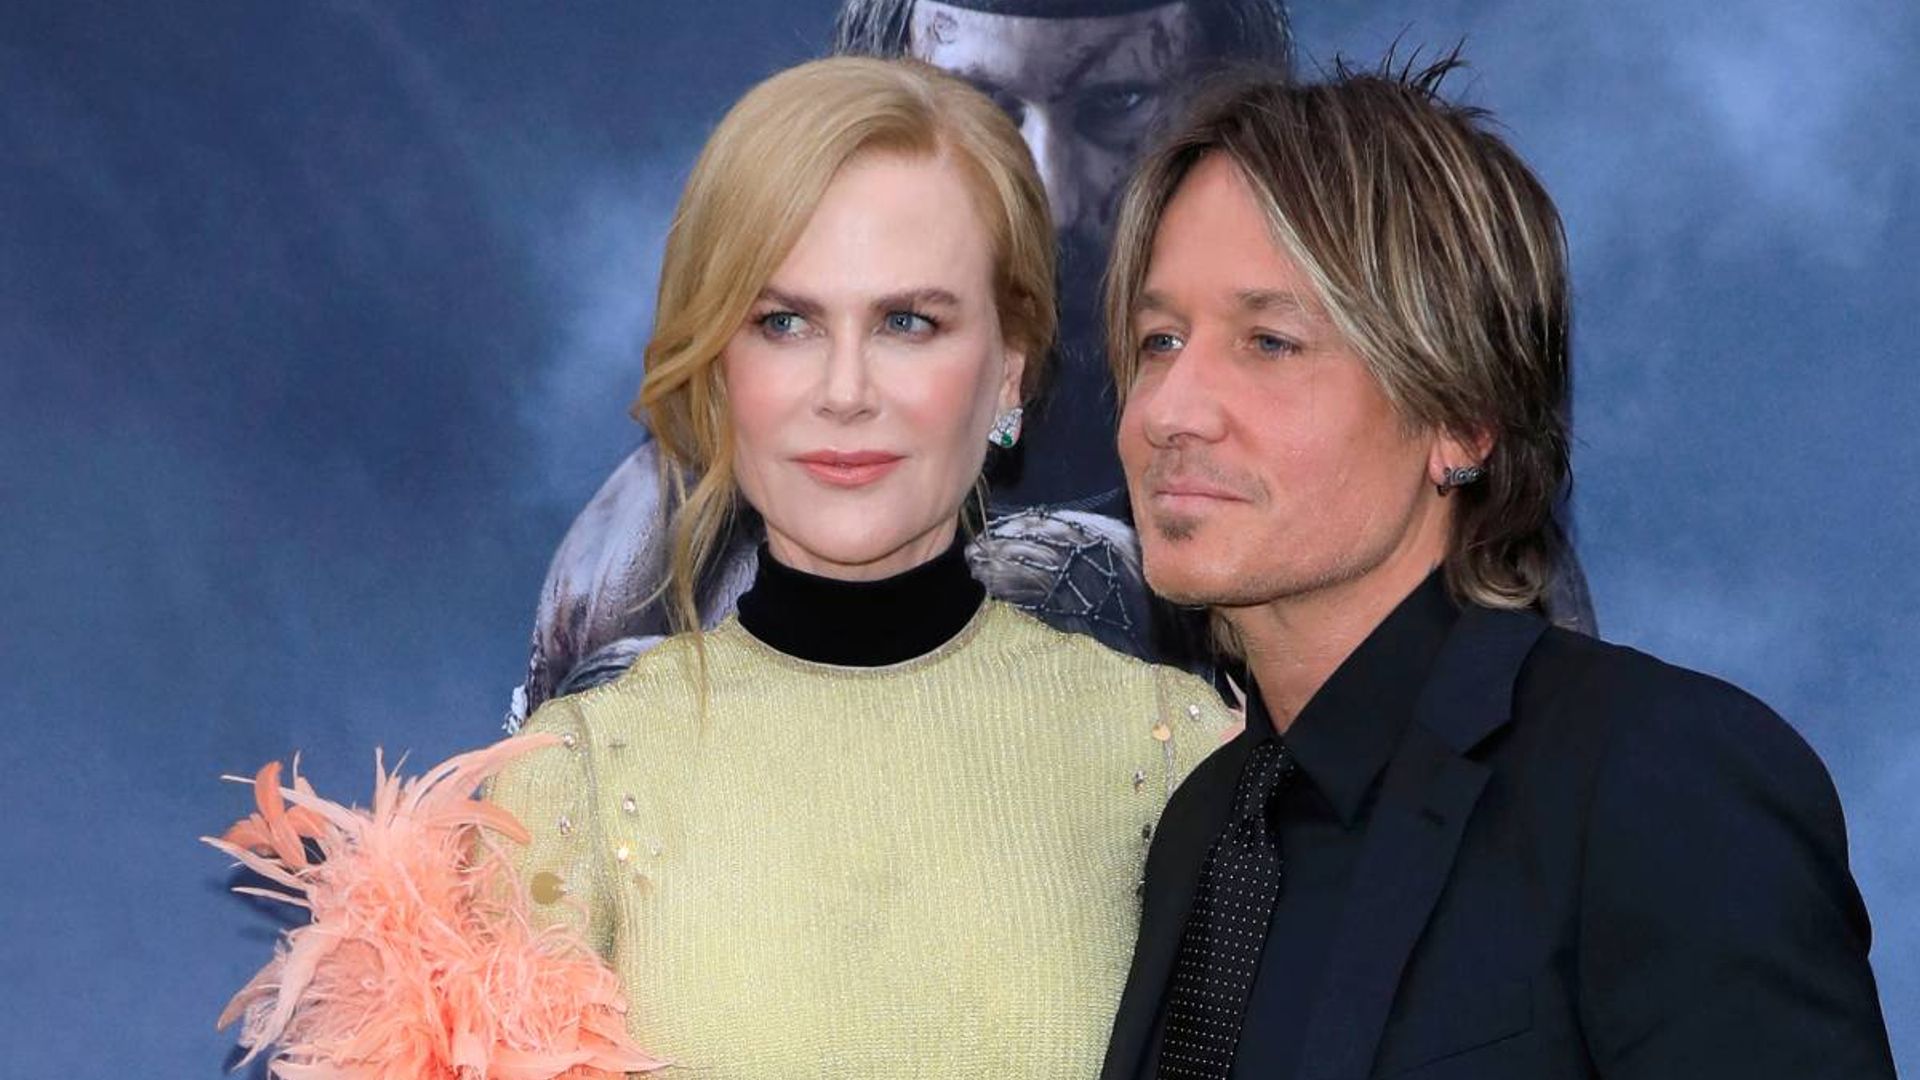 Keith Urban makes heartbreaking confession about family life